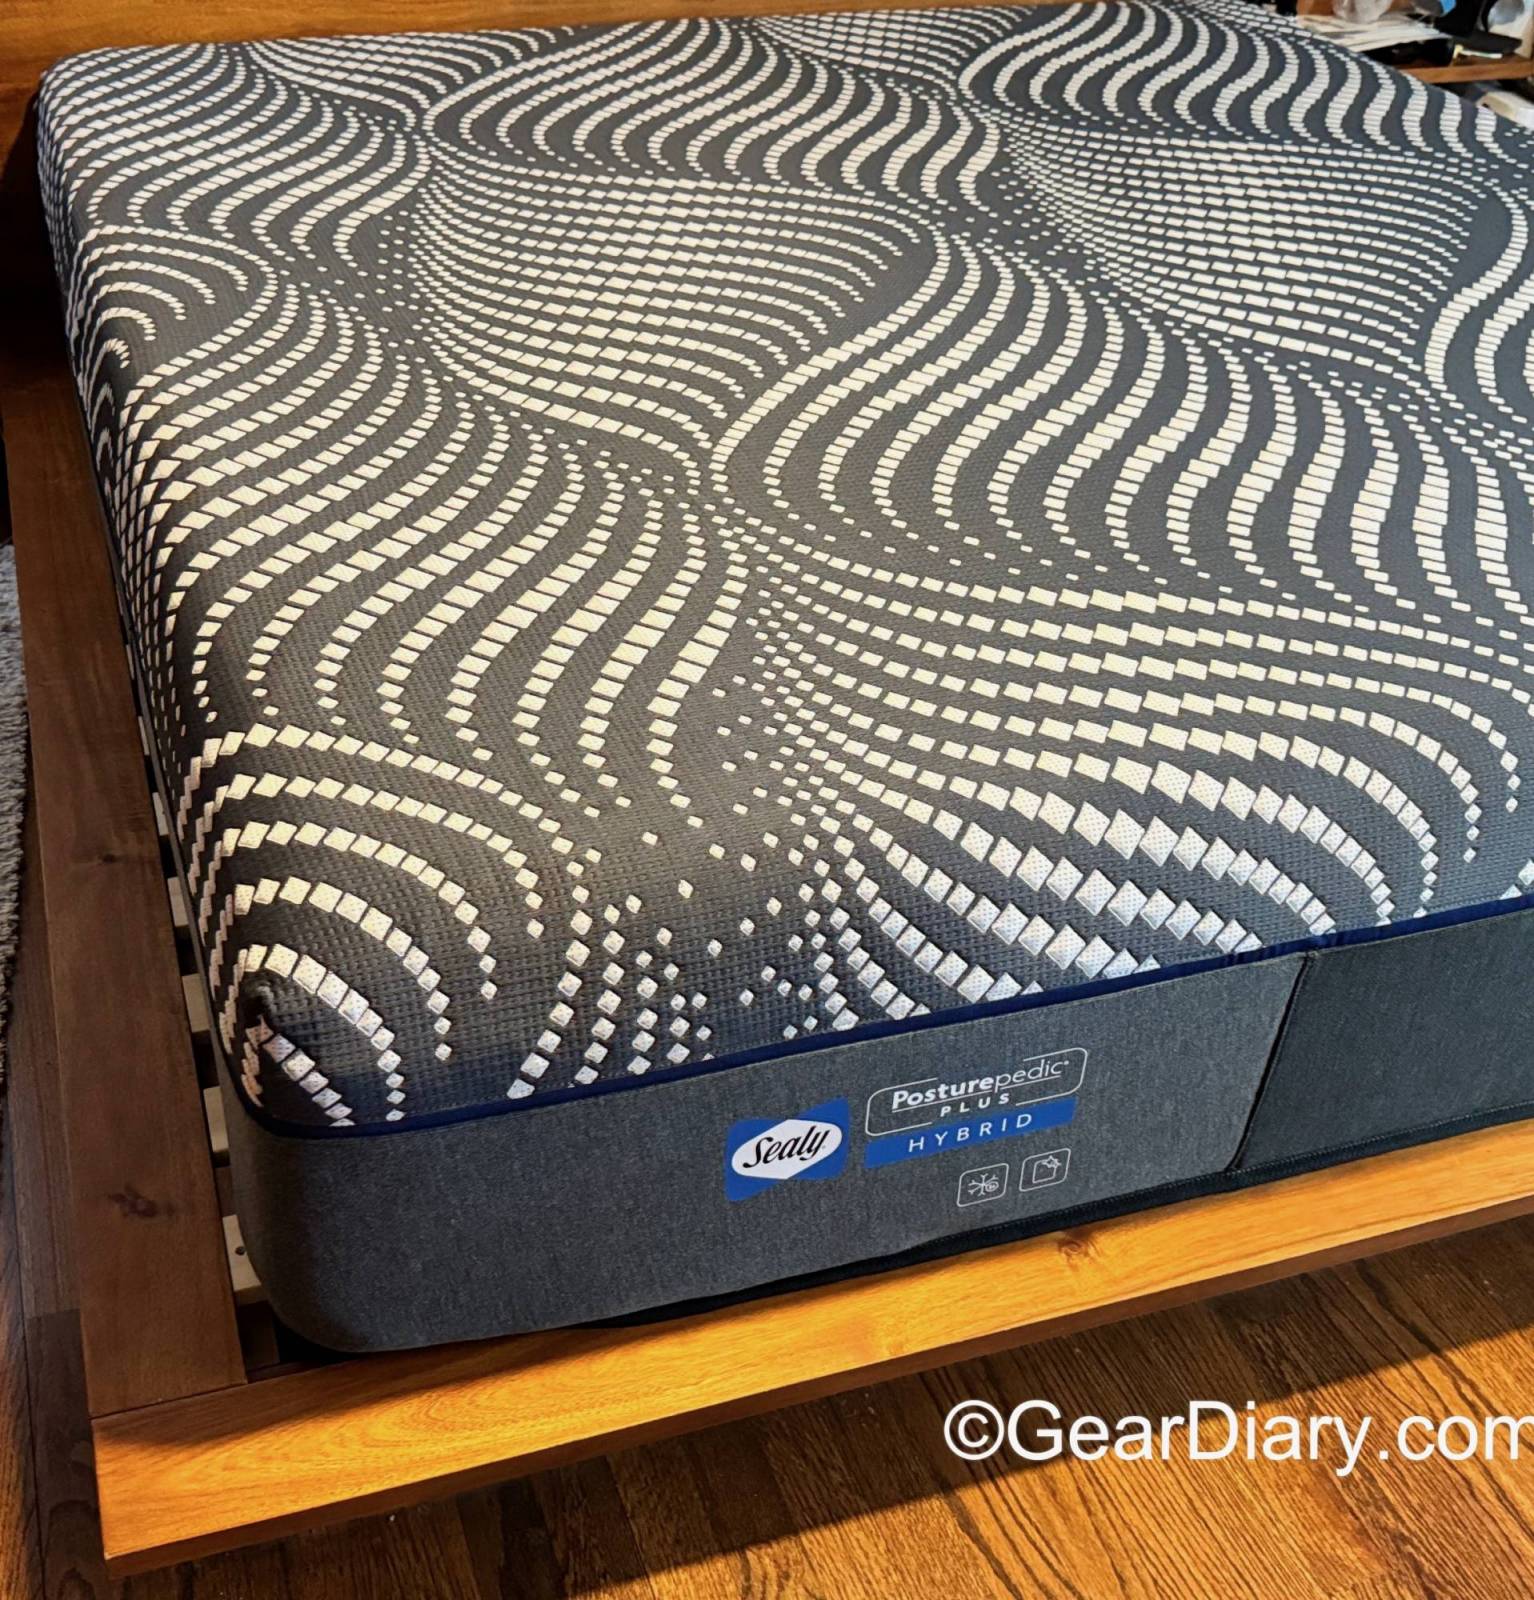 Sealy Posturepedic Plus Hybrid Review: The Mattress That Consistently Gives My Wife and Me Our Best Sleep